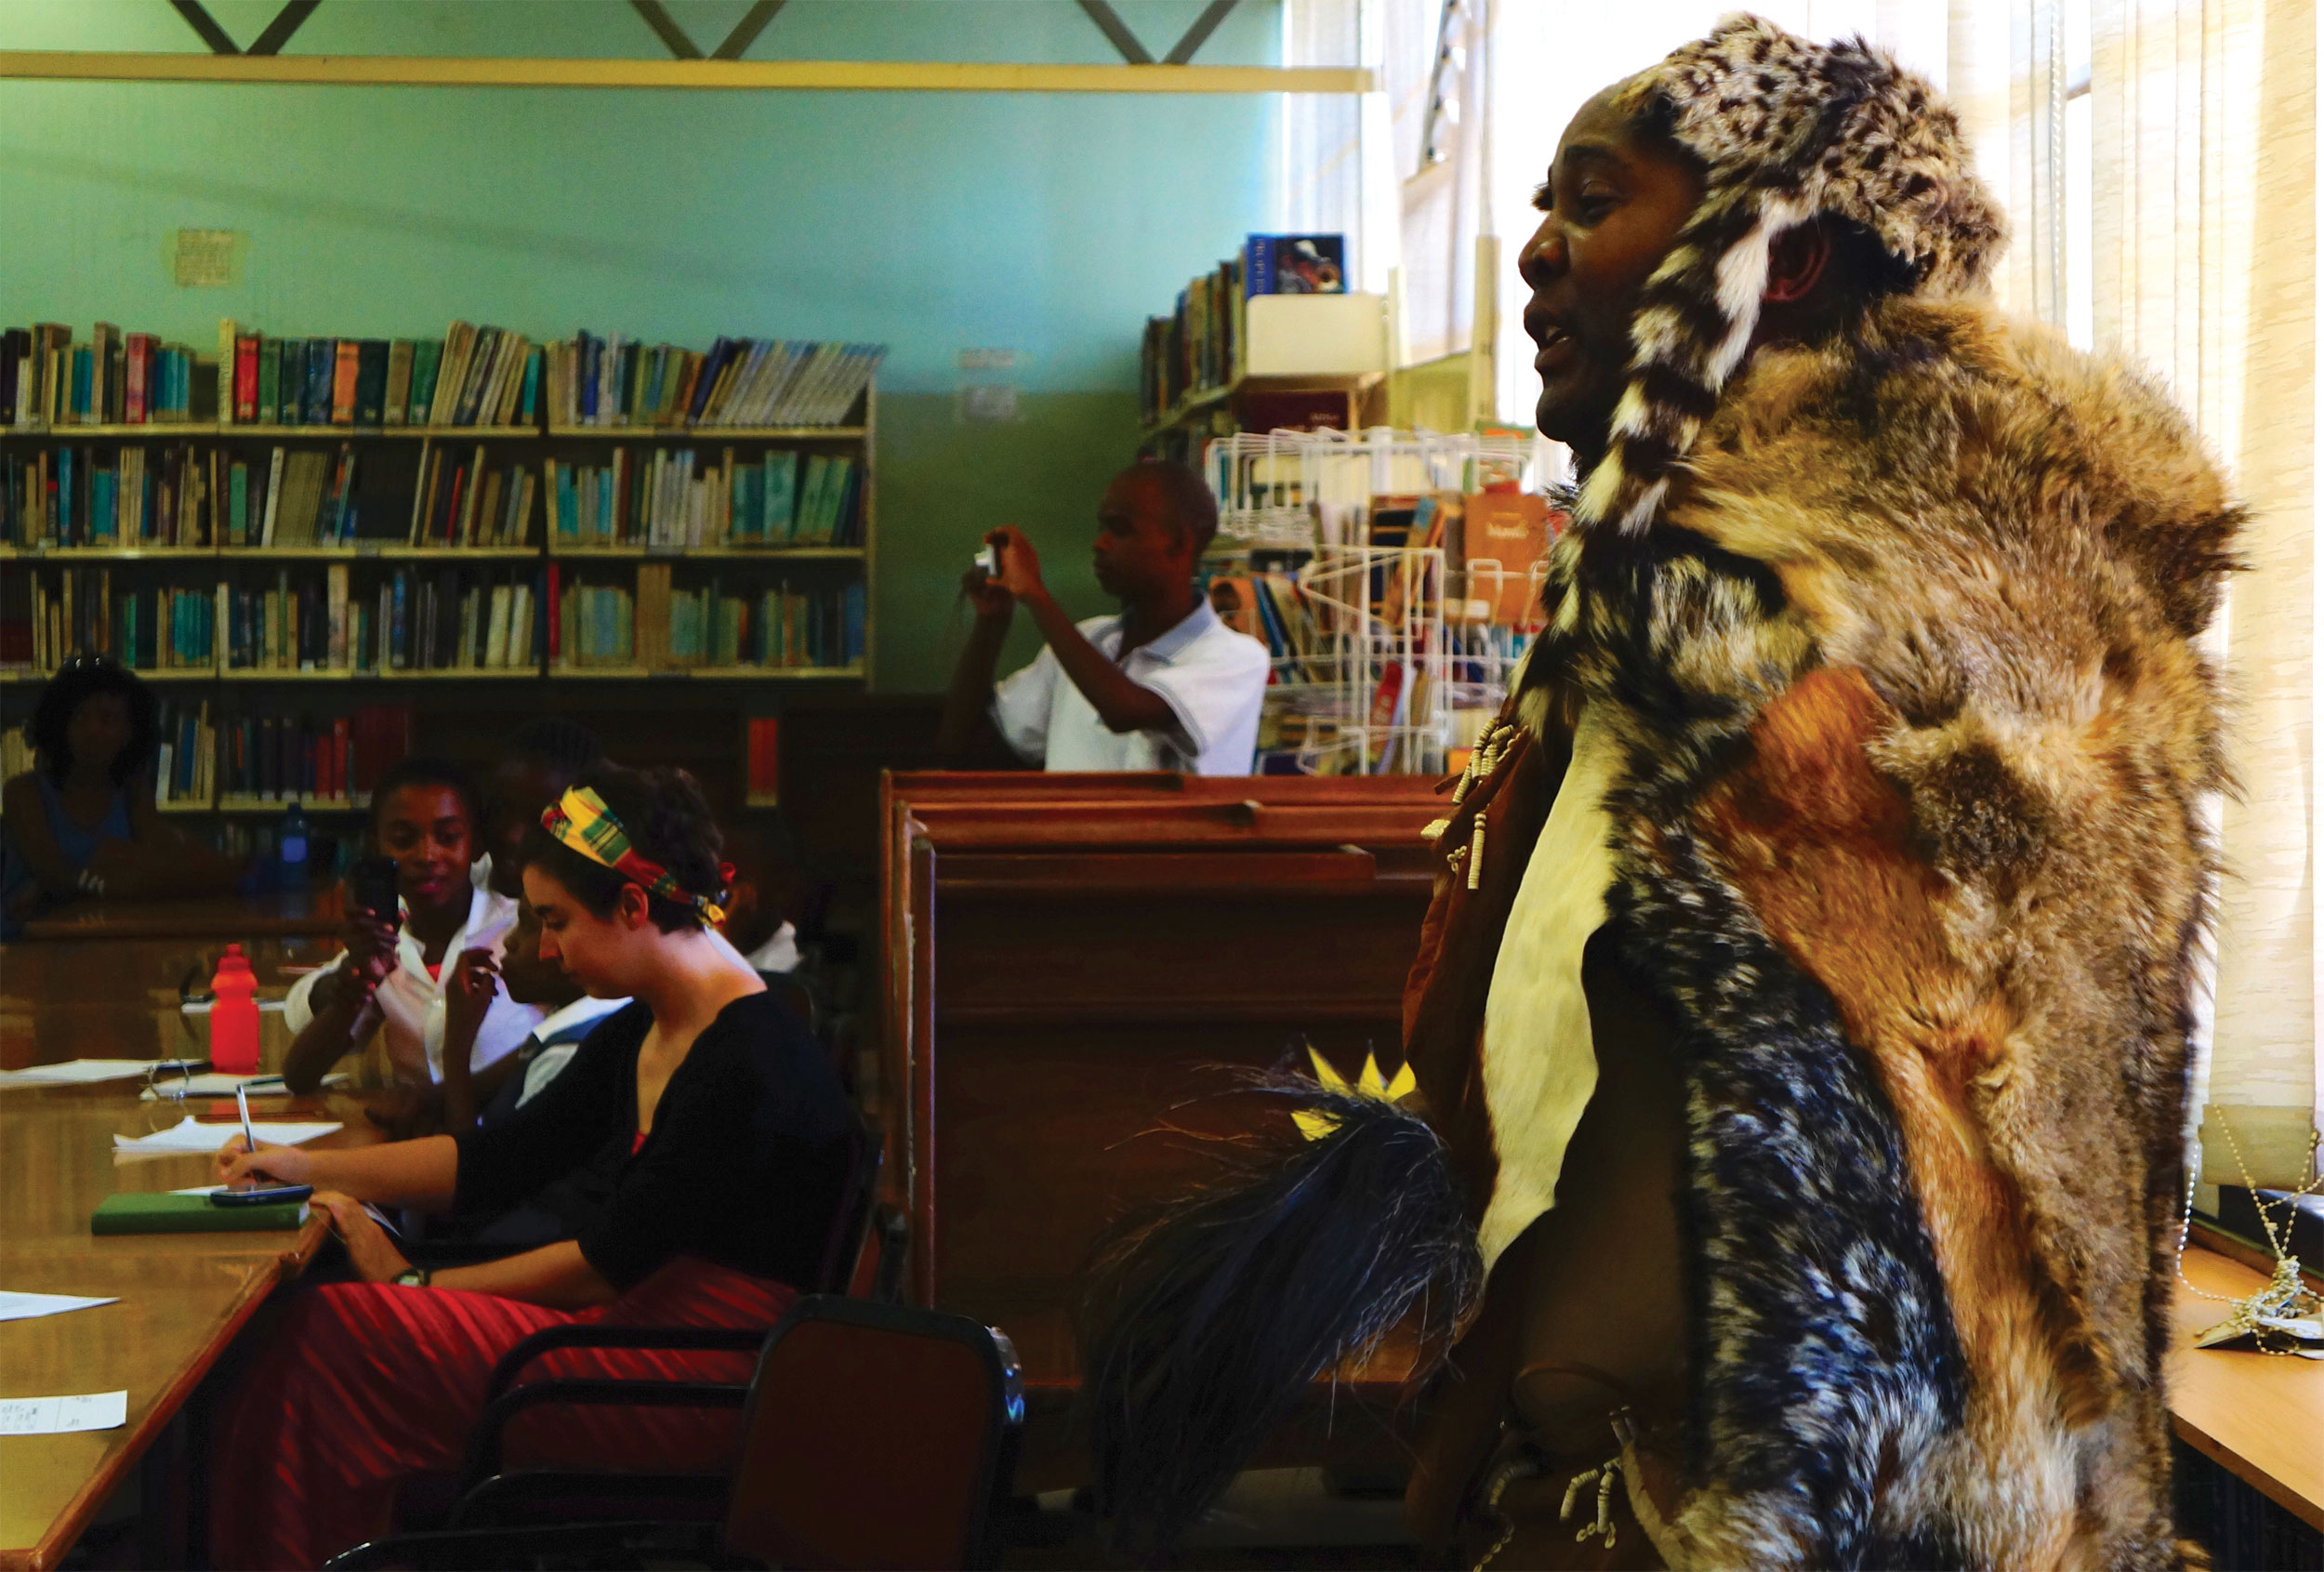 Moroka Moreri wears fur and patterned clothes, performing poetry in a room full of books